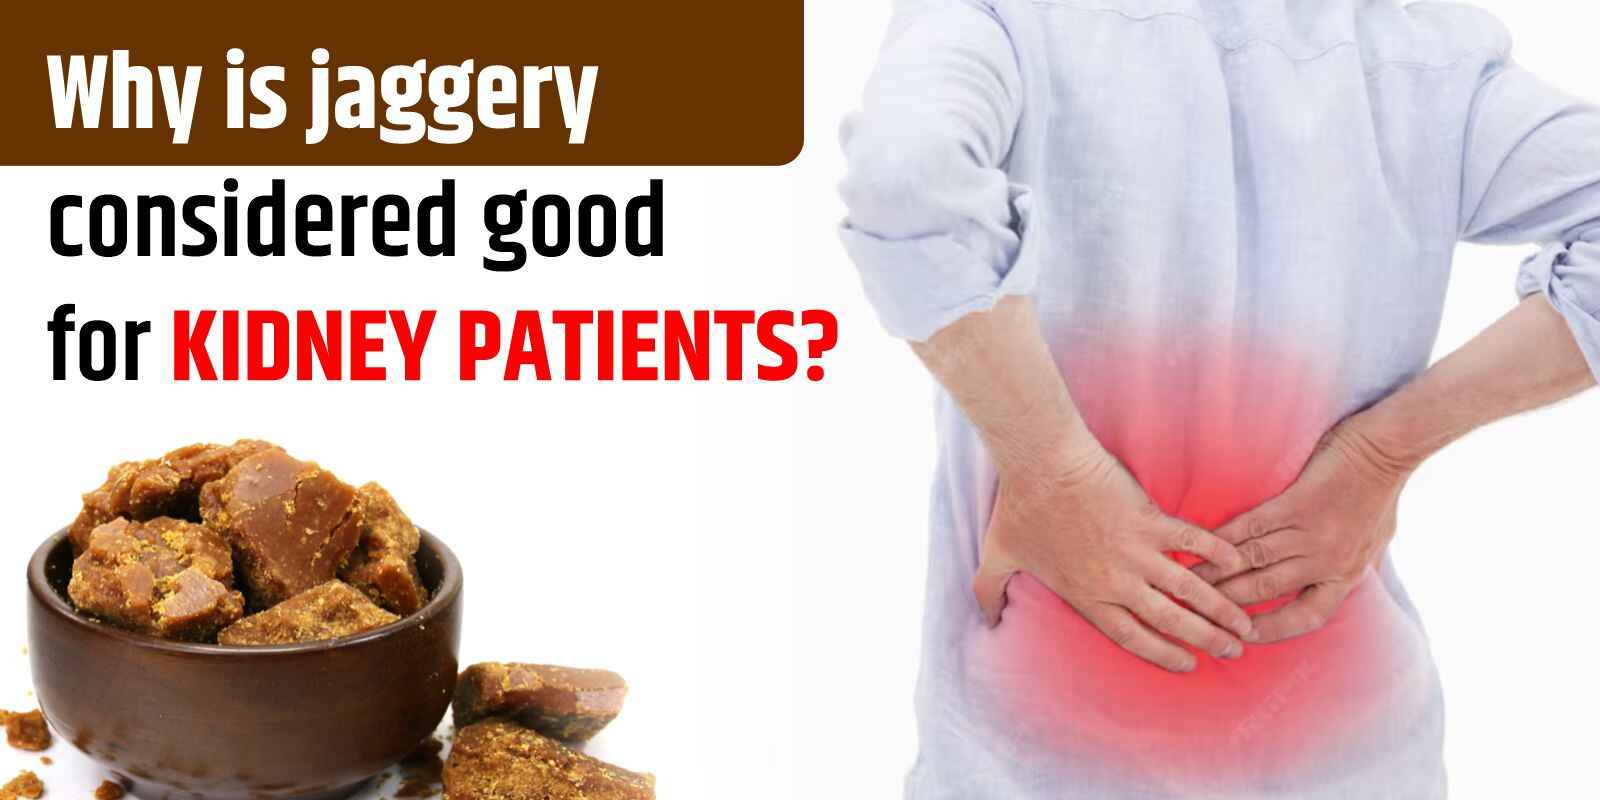 Why is jaggery considered good for kidney patients?